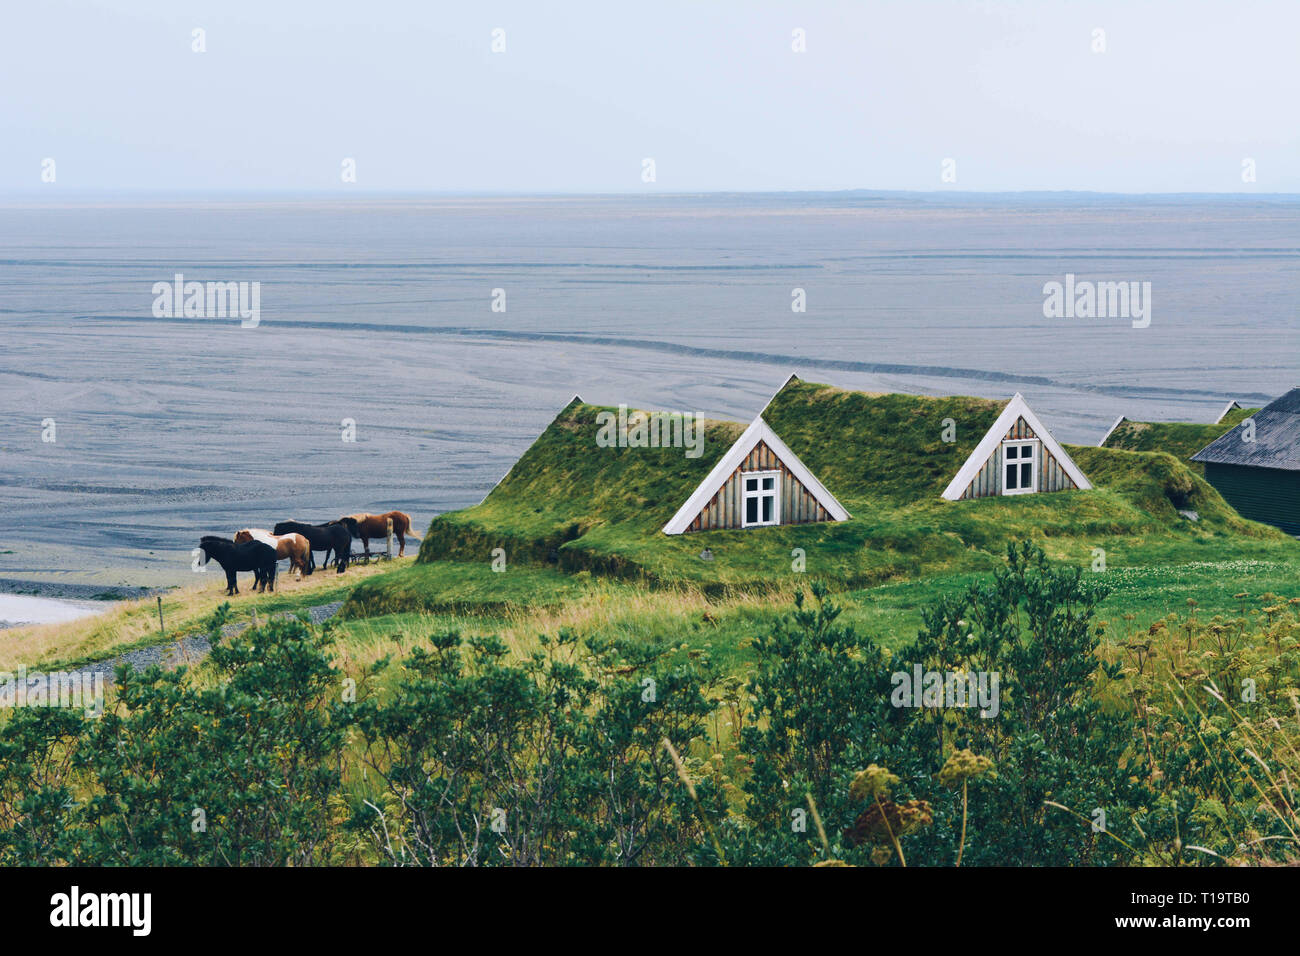 Iceland horses and typical small house in Iceland. Stock Photo